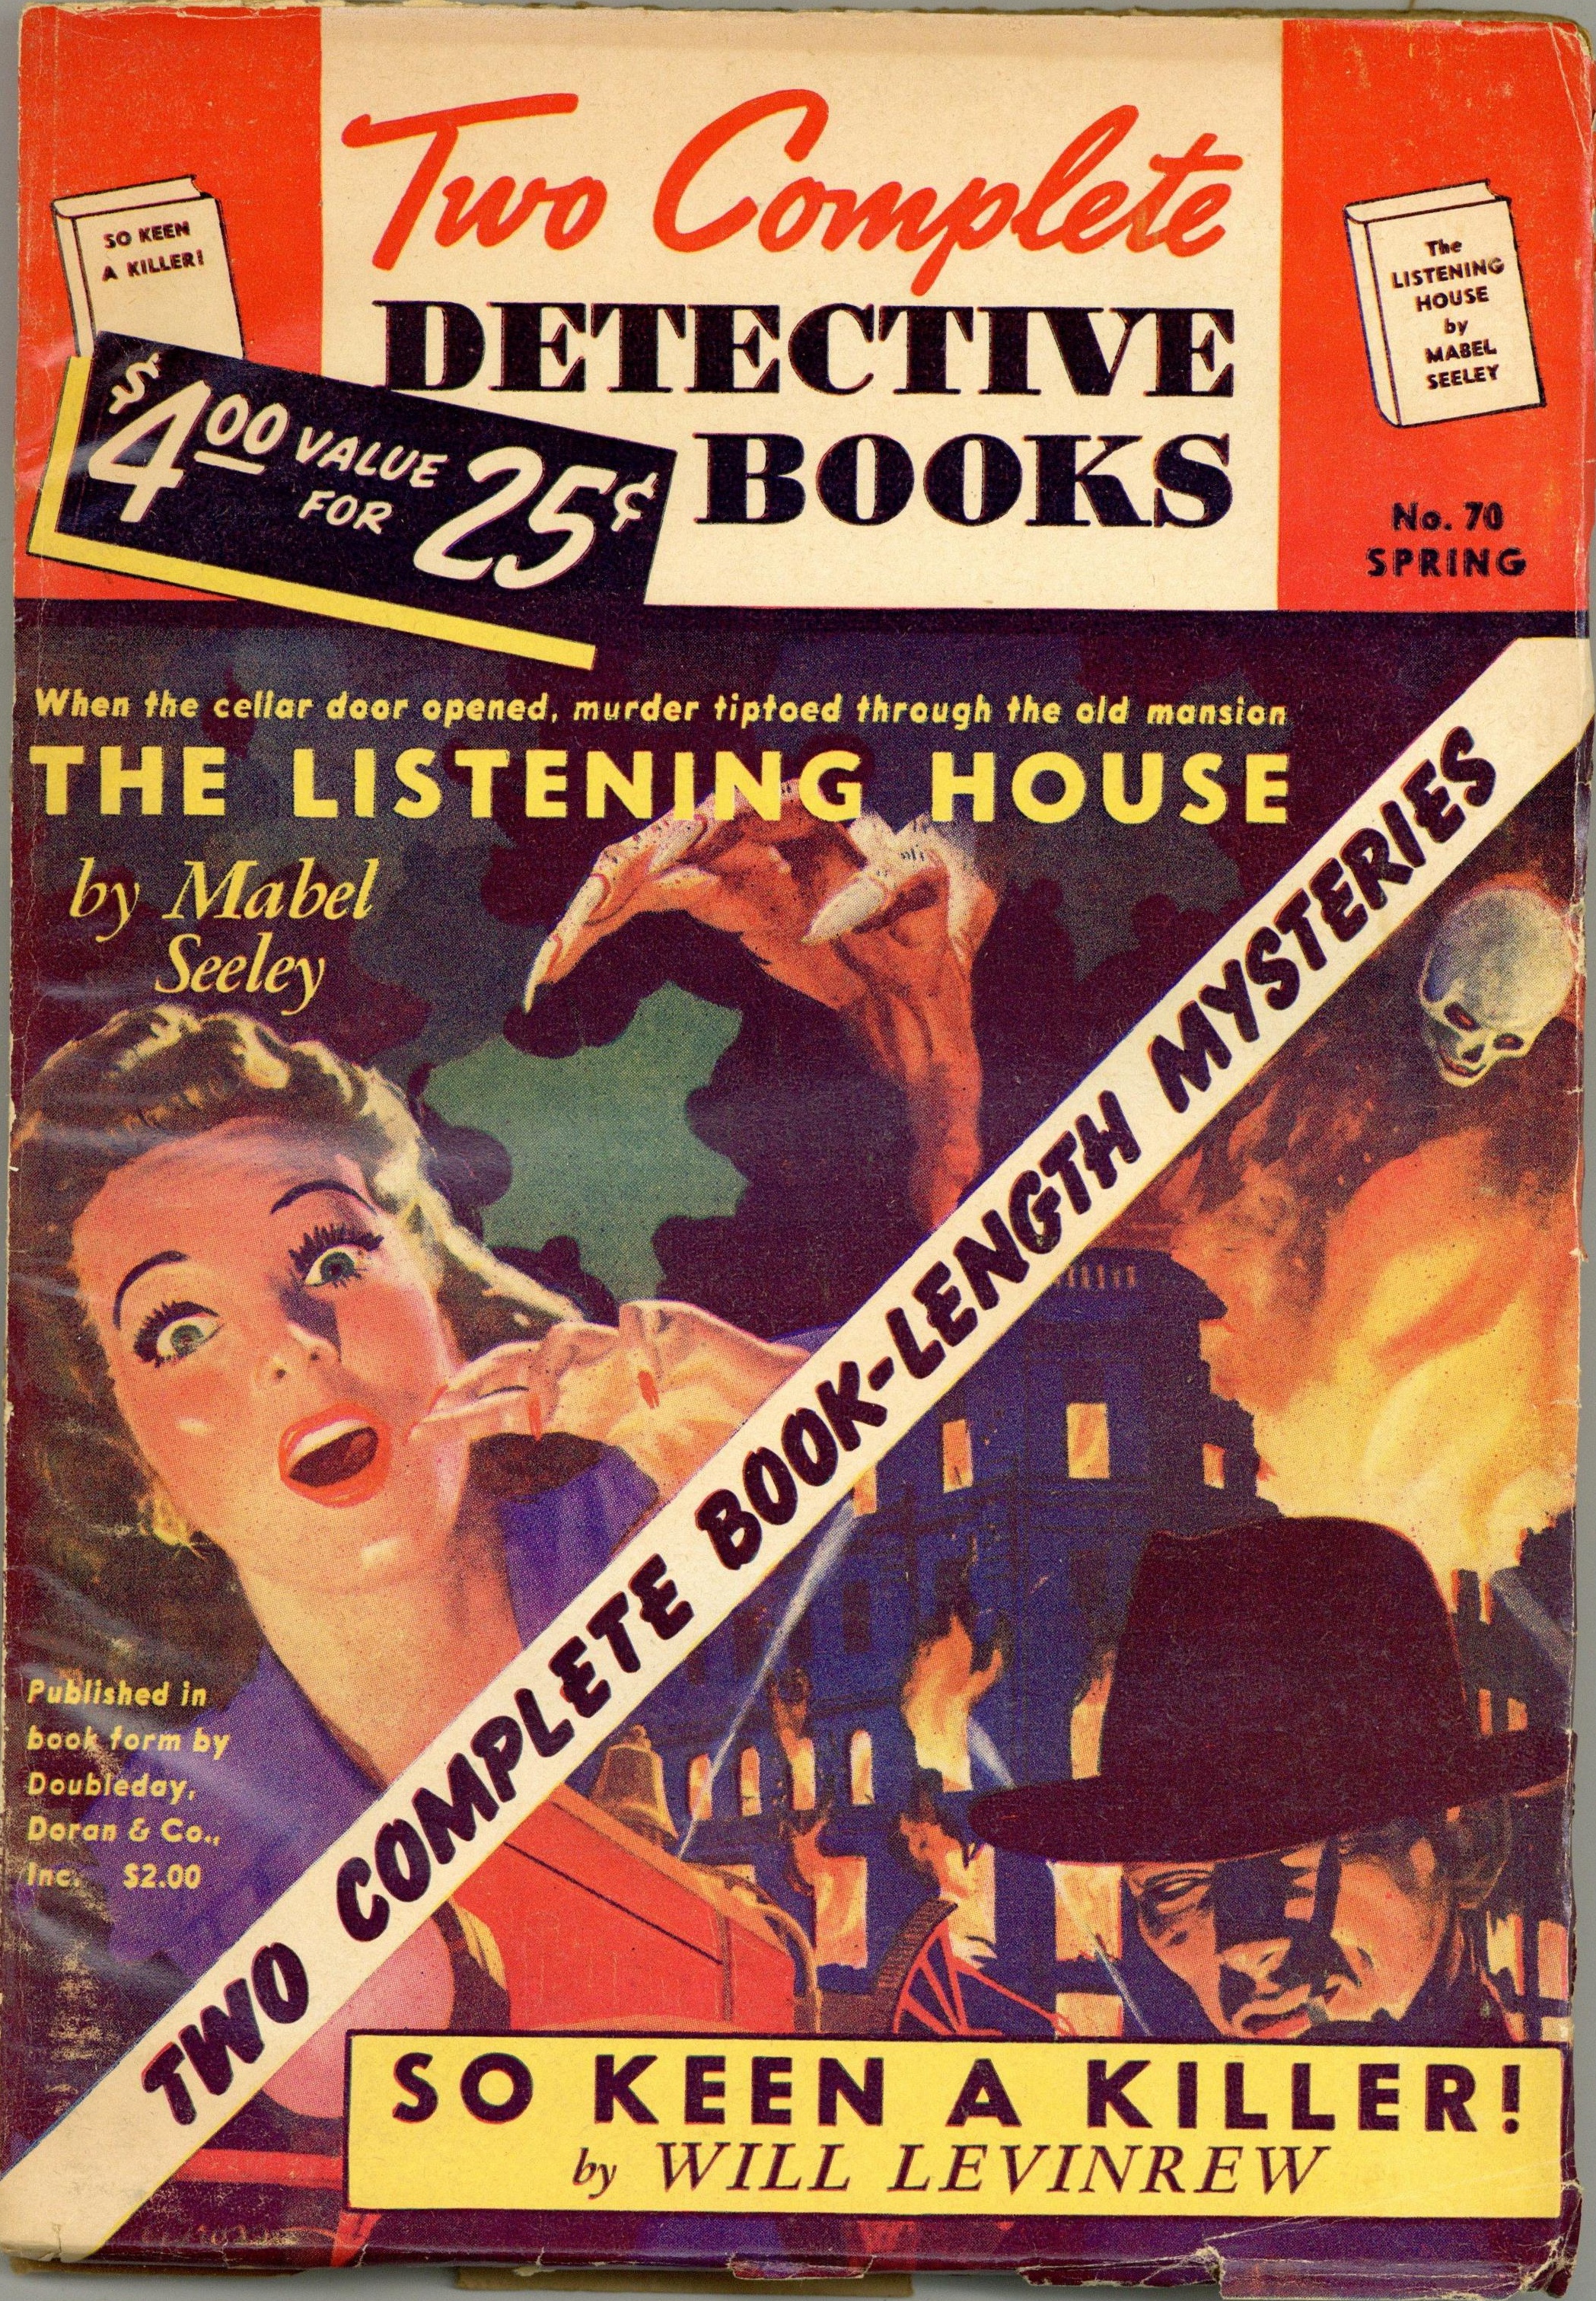 Two Complete Detective Books March 1952